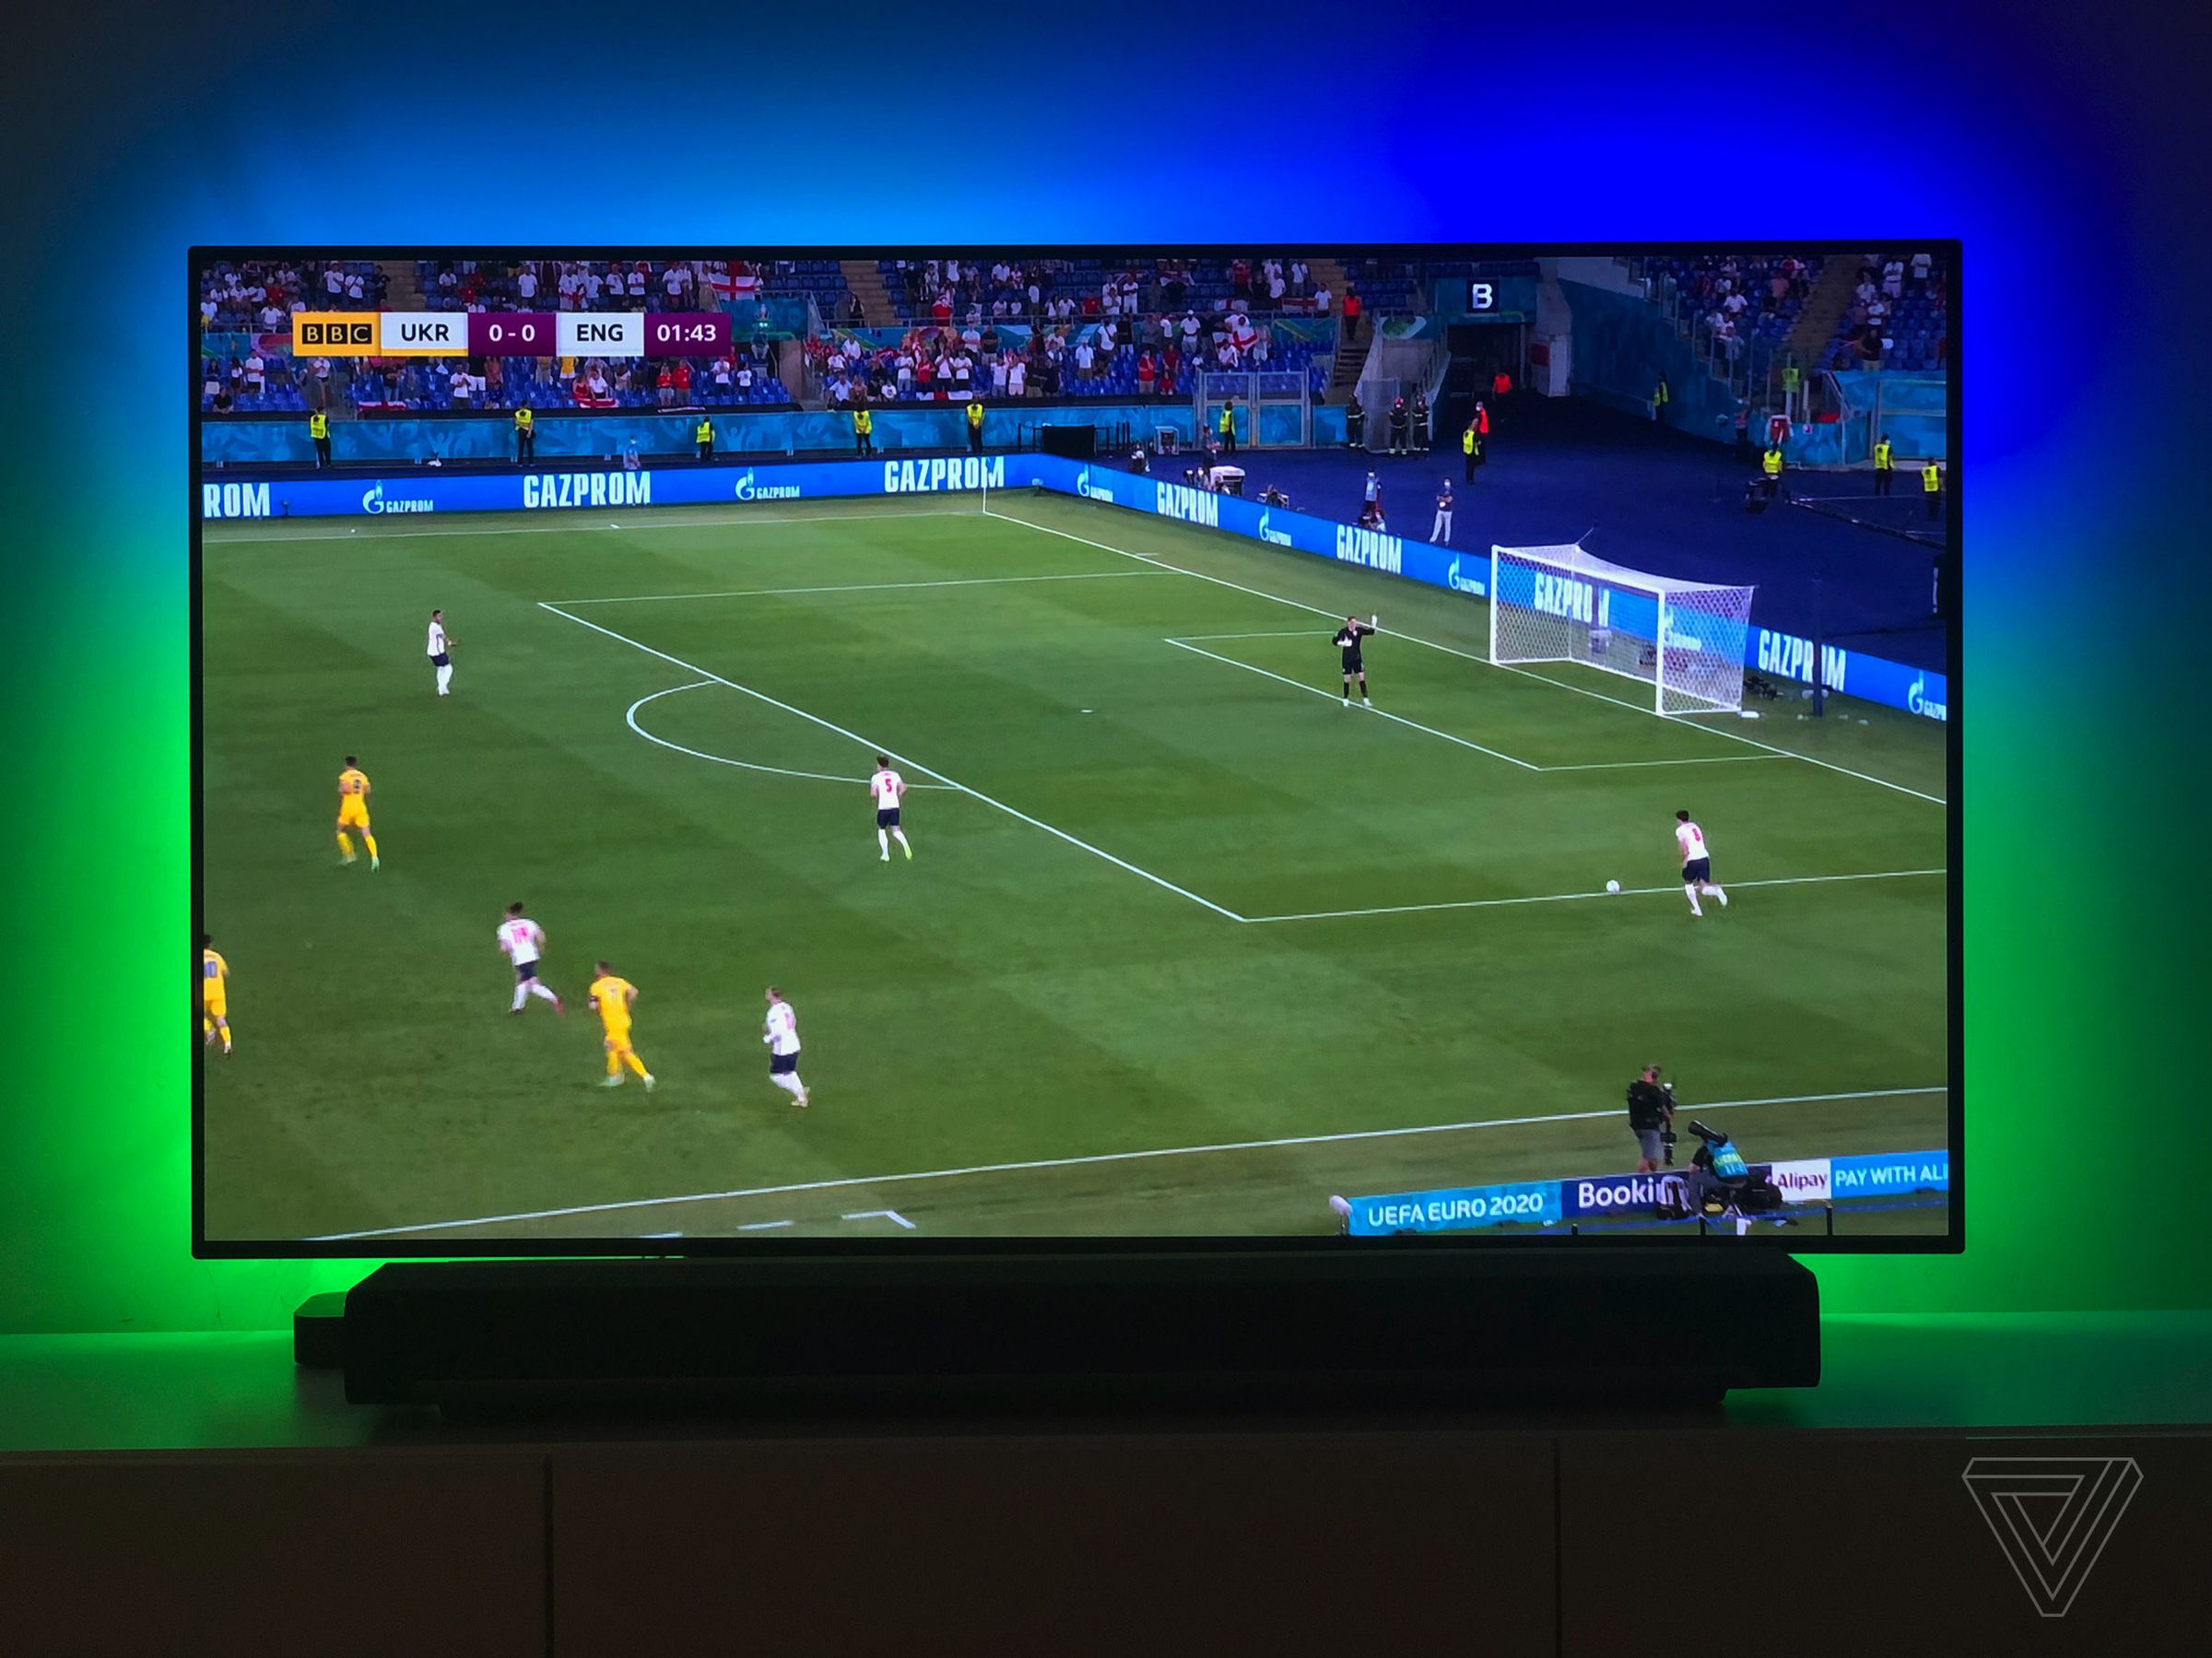 Soccer looks amazing in Part / Movie mode, thanks to wide shots with few camera changes.